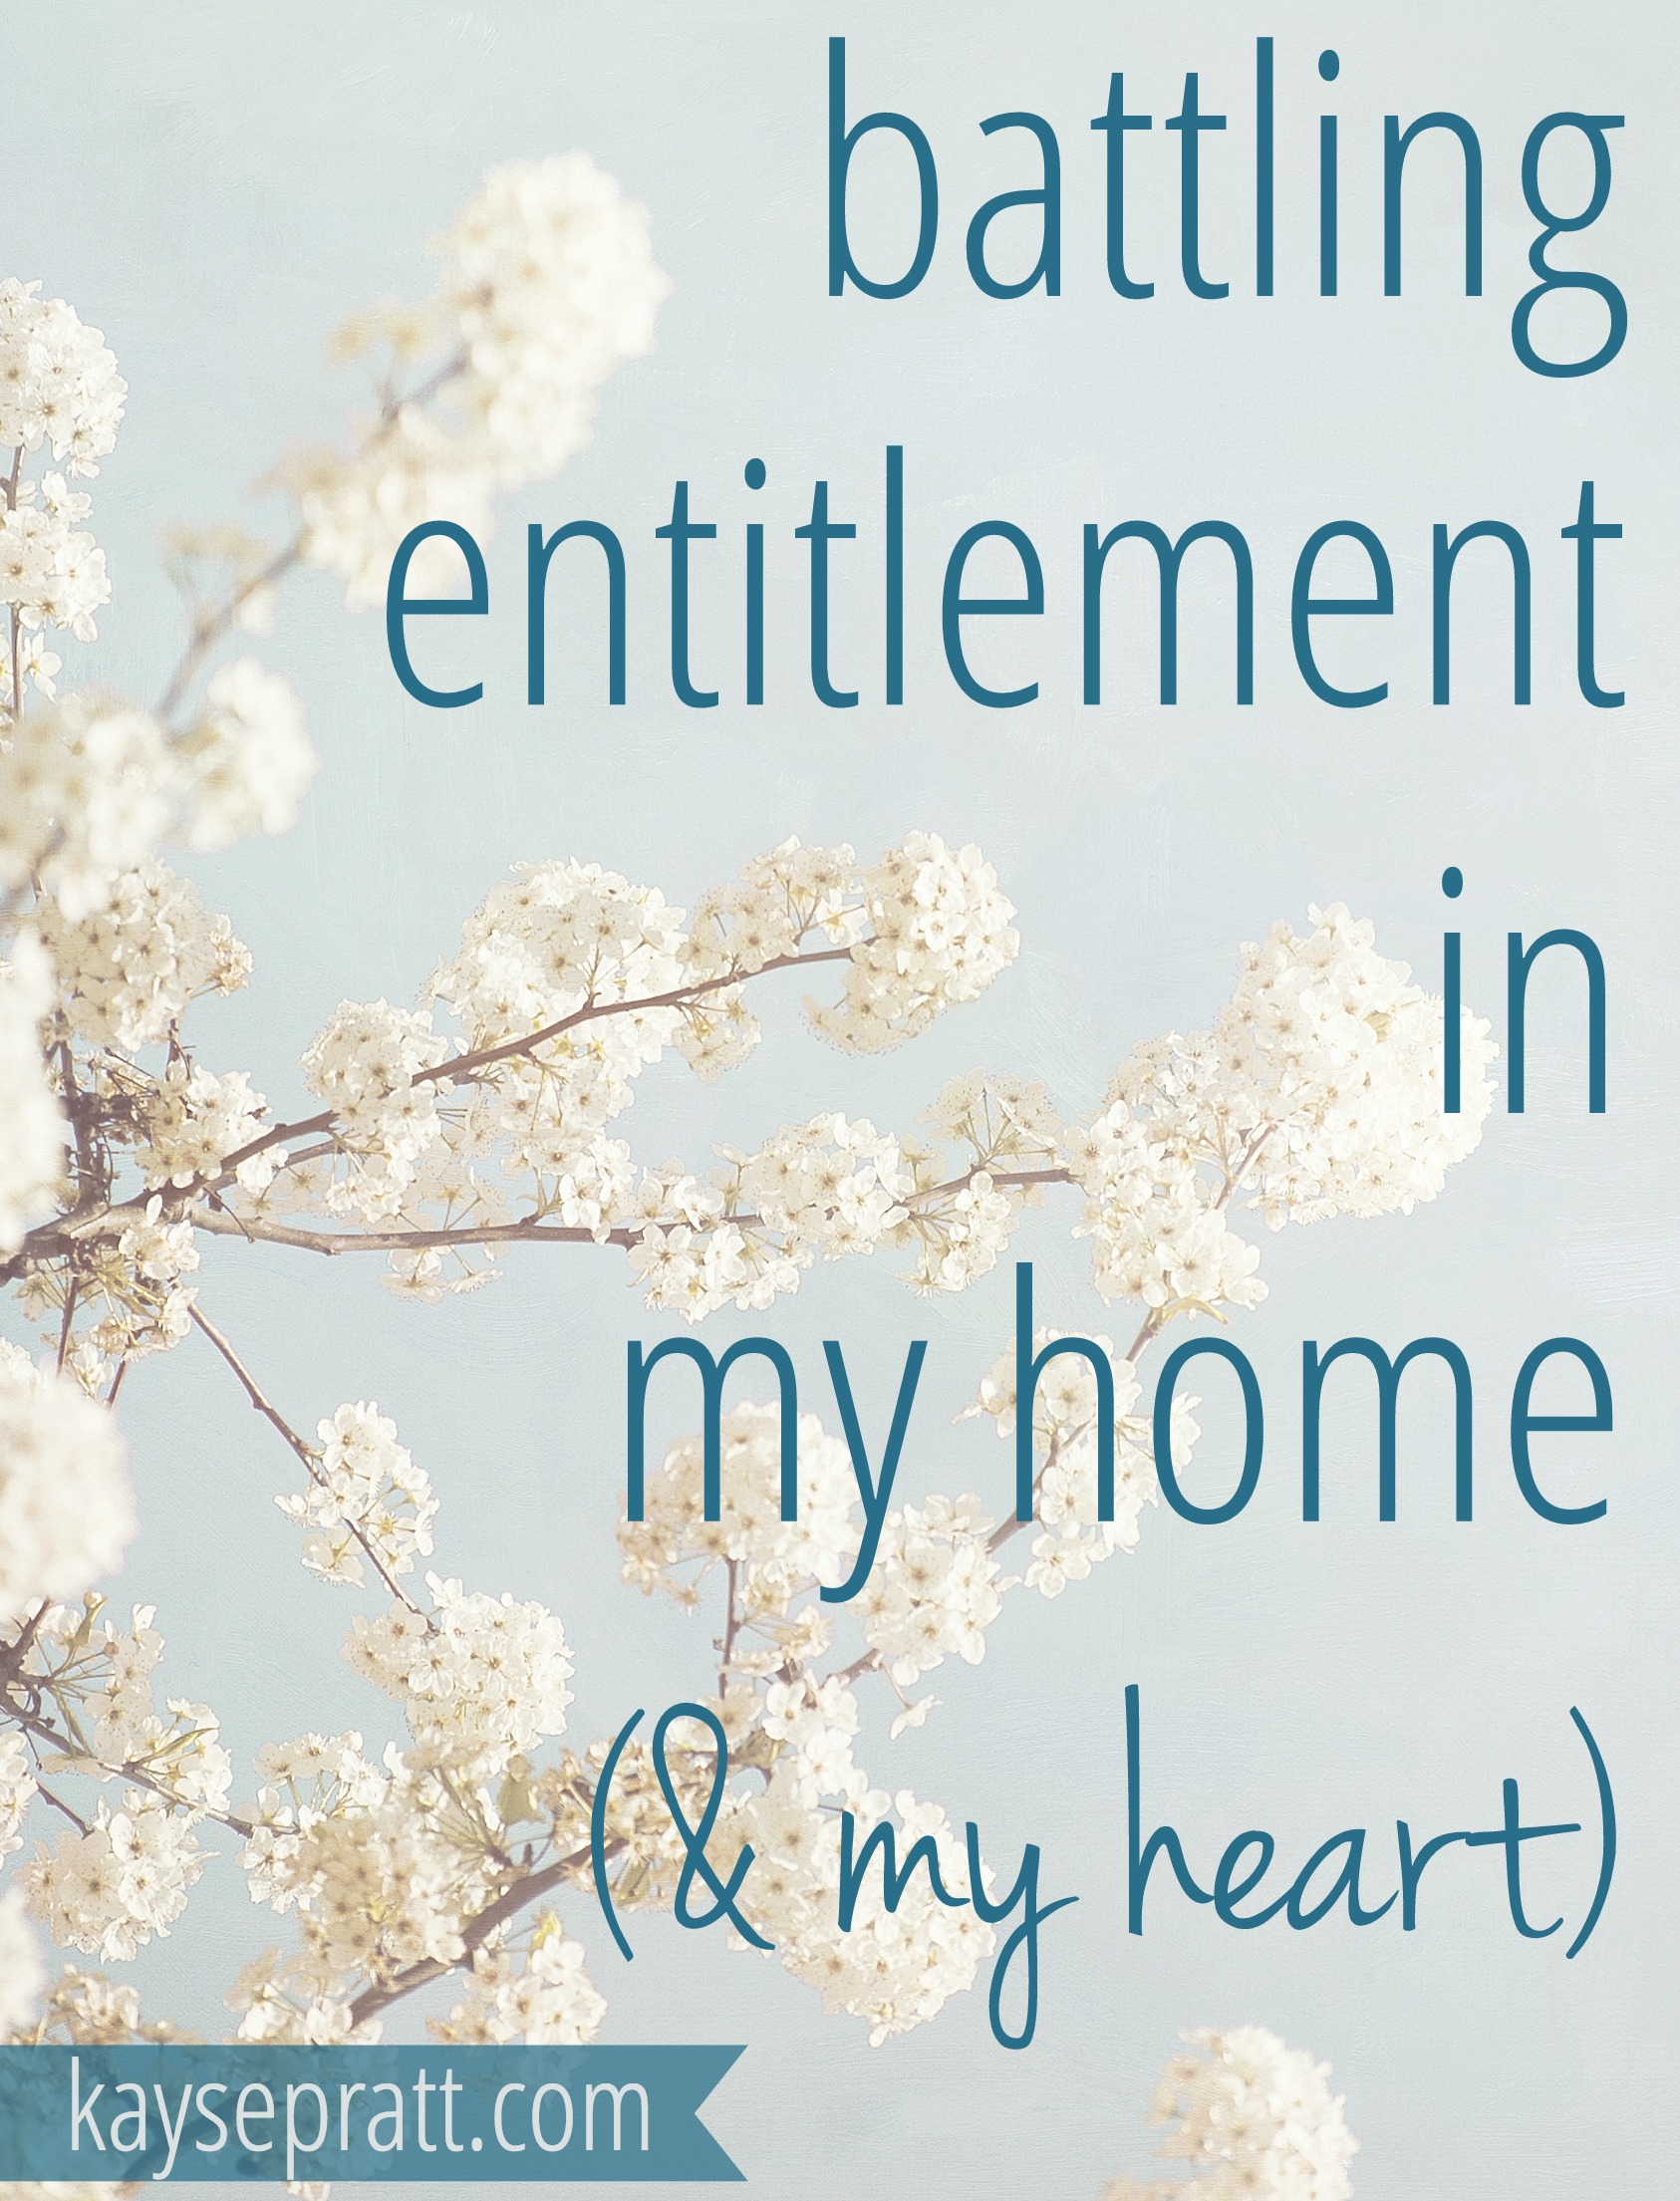 Battling Entitlement in My Home (& My Heart)